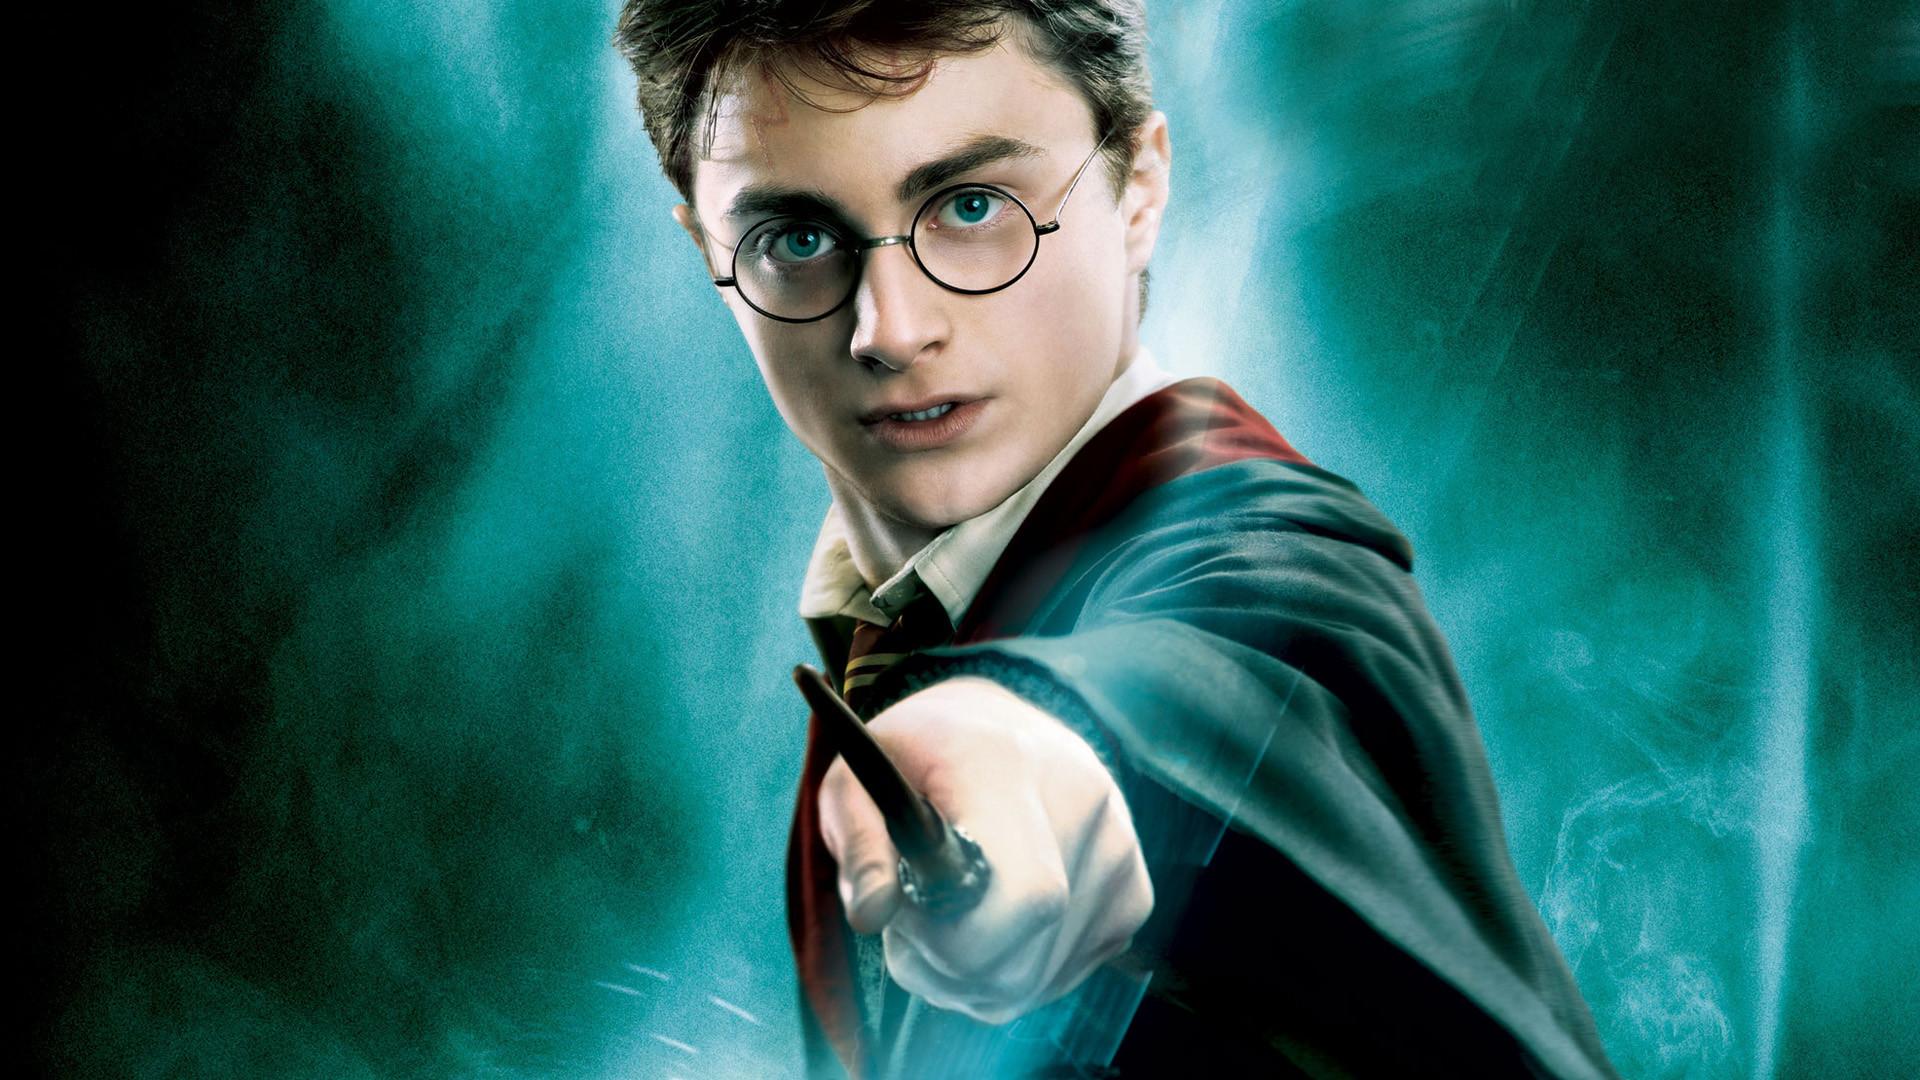 Poll: What is your favorite Harry Potter film?